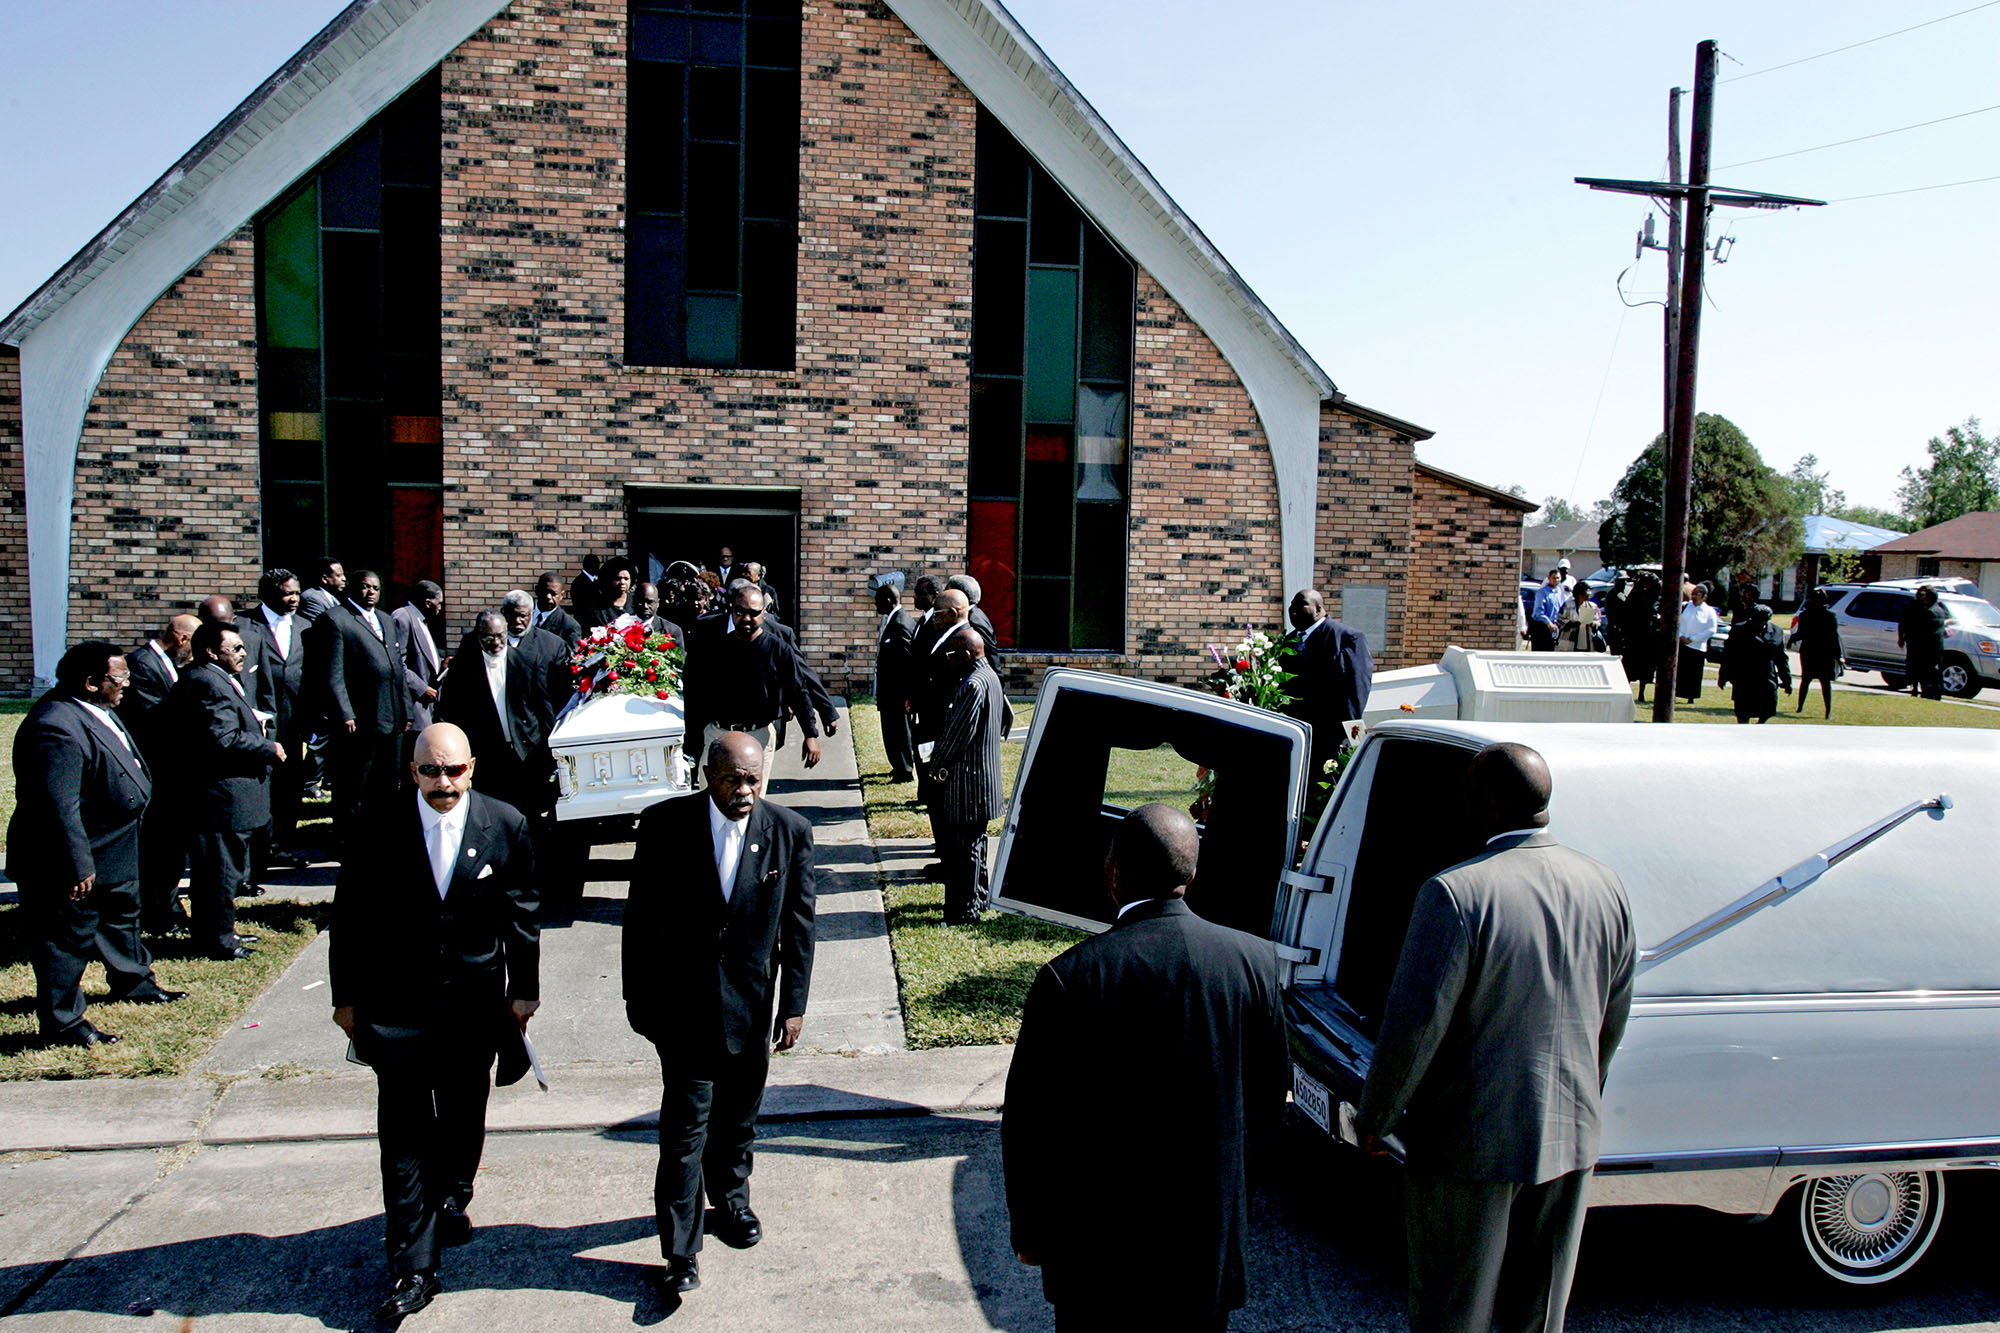 One of many funerals in the months after hurricane Katrina.